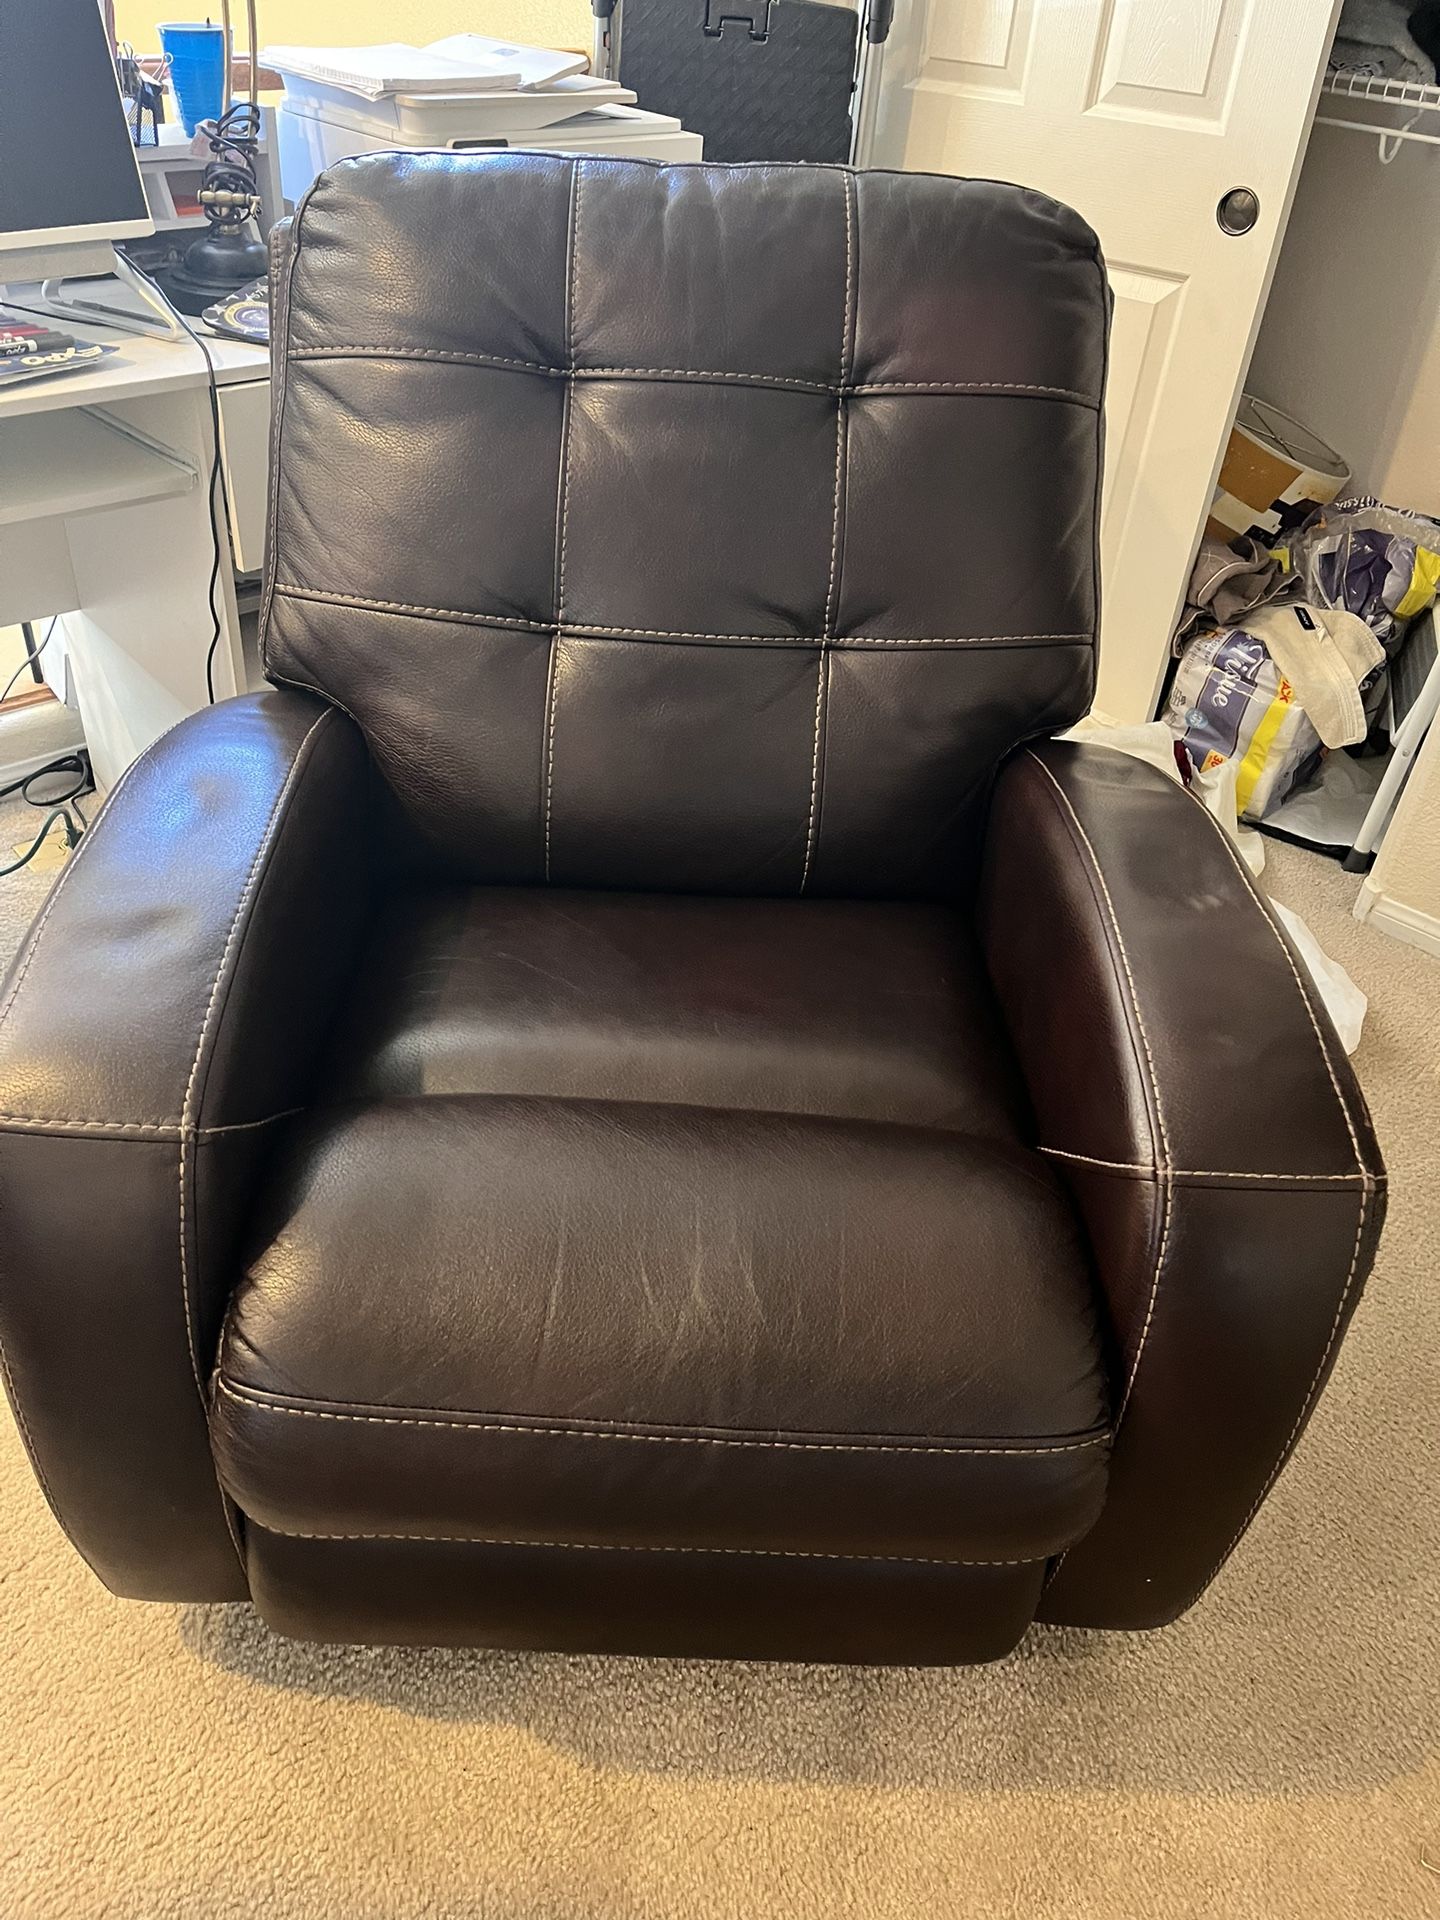 Leather Recliner Chair For Sale 